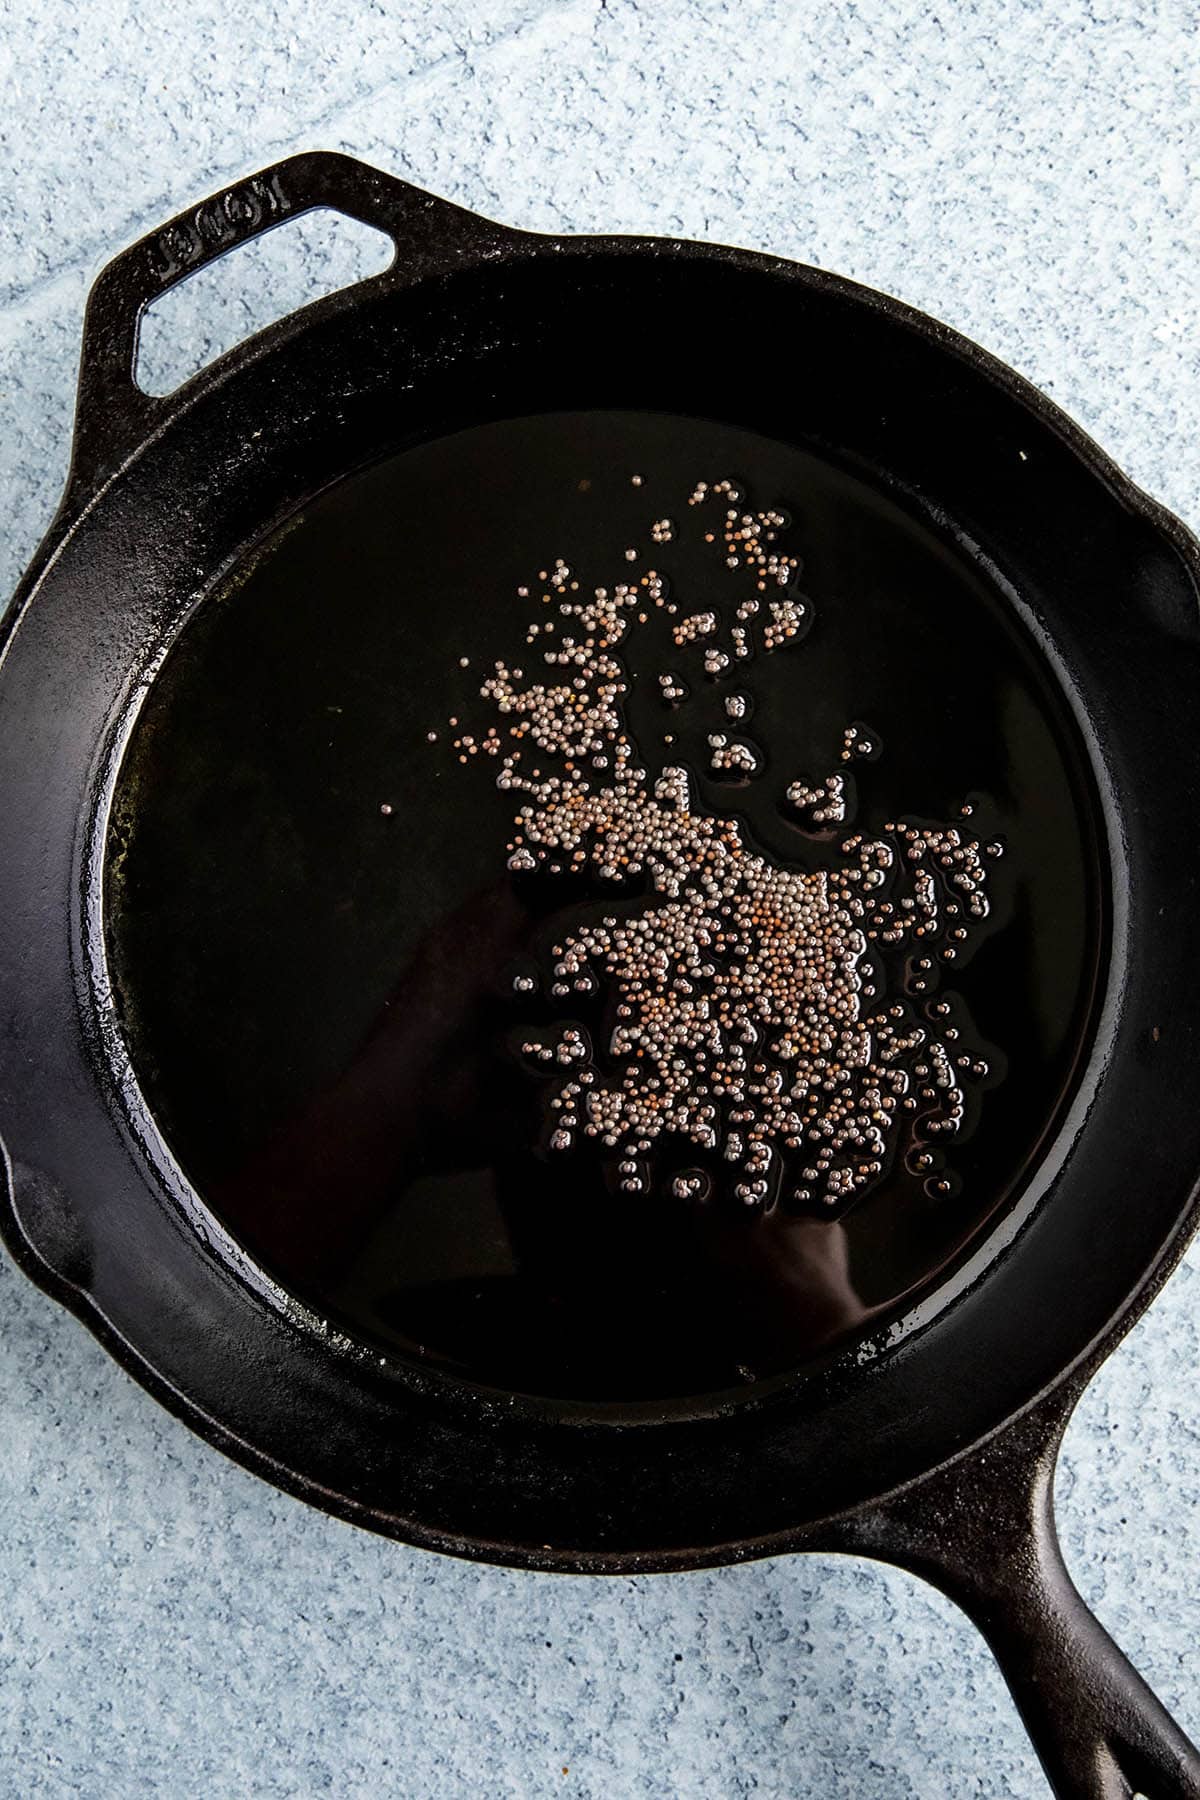 Heating mustard seeds in a hot pan